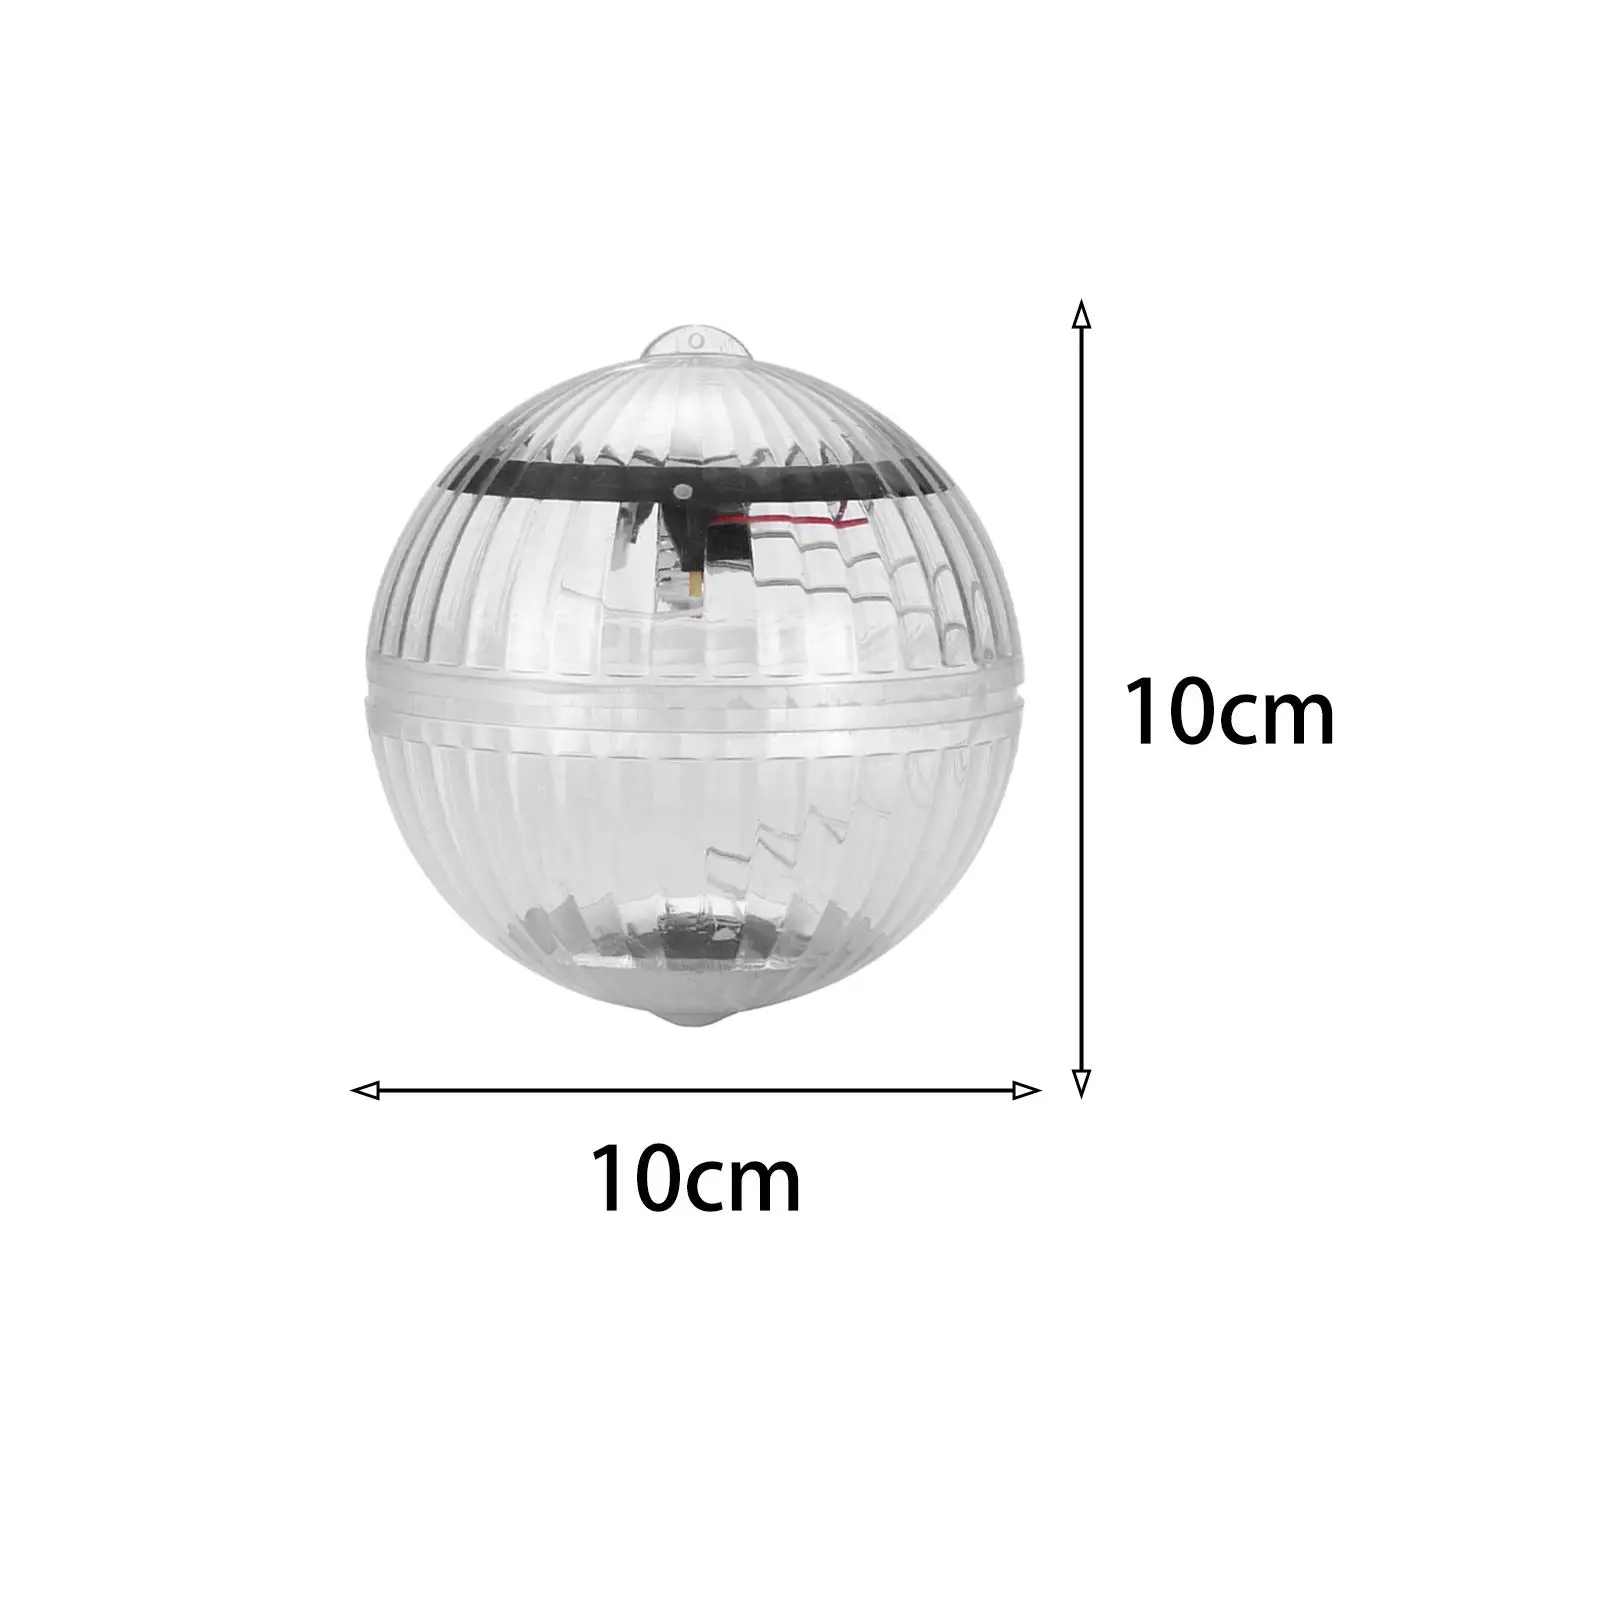 Pool Solar Floating Light Decoration LED Waterproof Ball Lamp Garden Decorative Light for Outdoor Lawn Pond Beach Swimming Pool